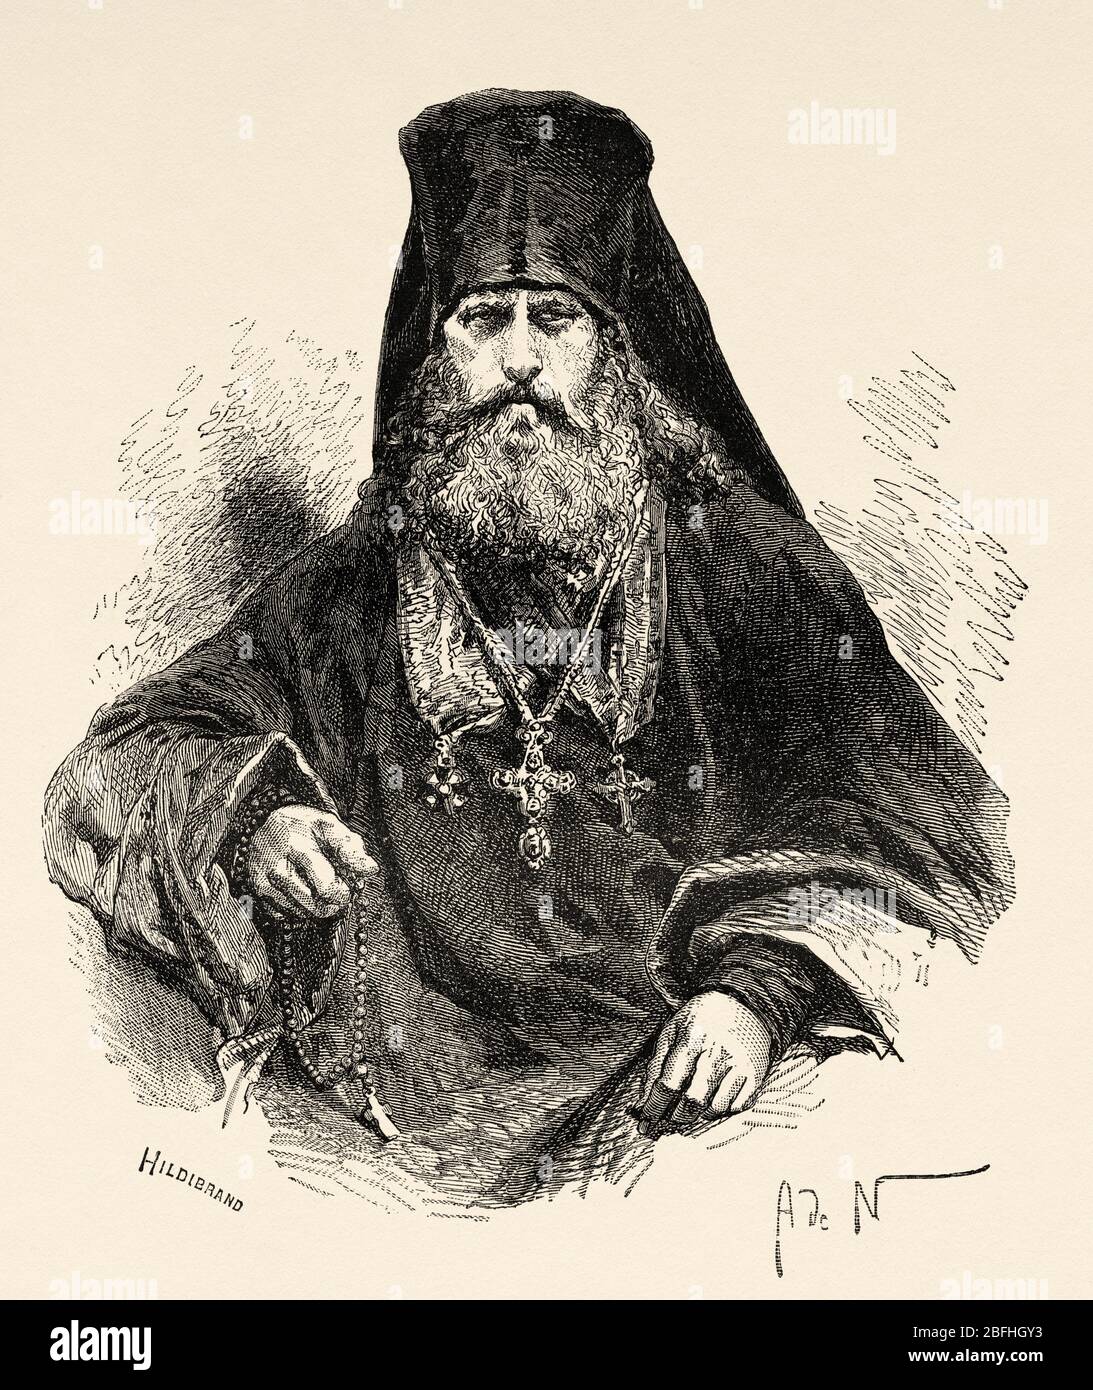 Feofan, Archimandrite of the Russian Orthodox Solovetsky Monastery. Solovetsky Island Group, White Sea, Russia. Old engraving illustration, Travel to Stock Photo